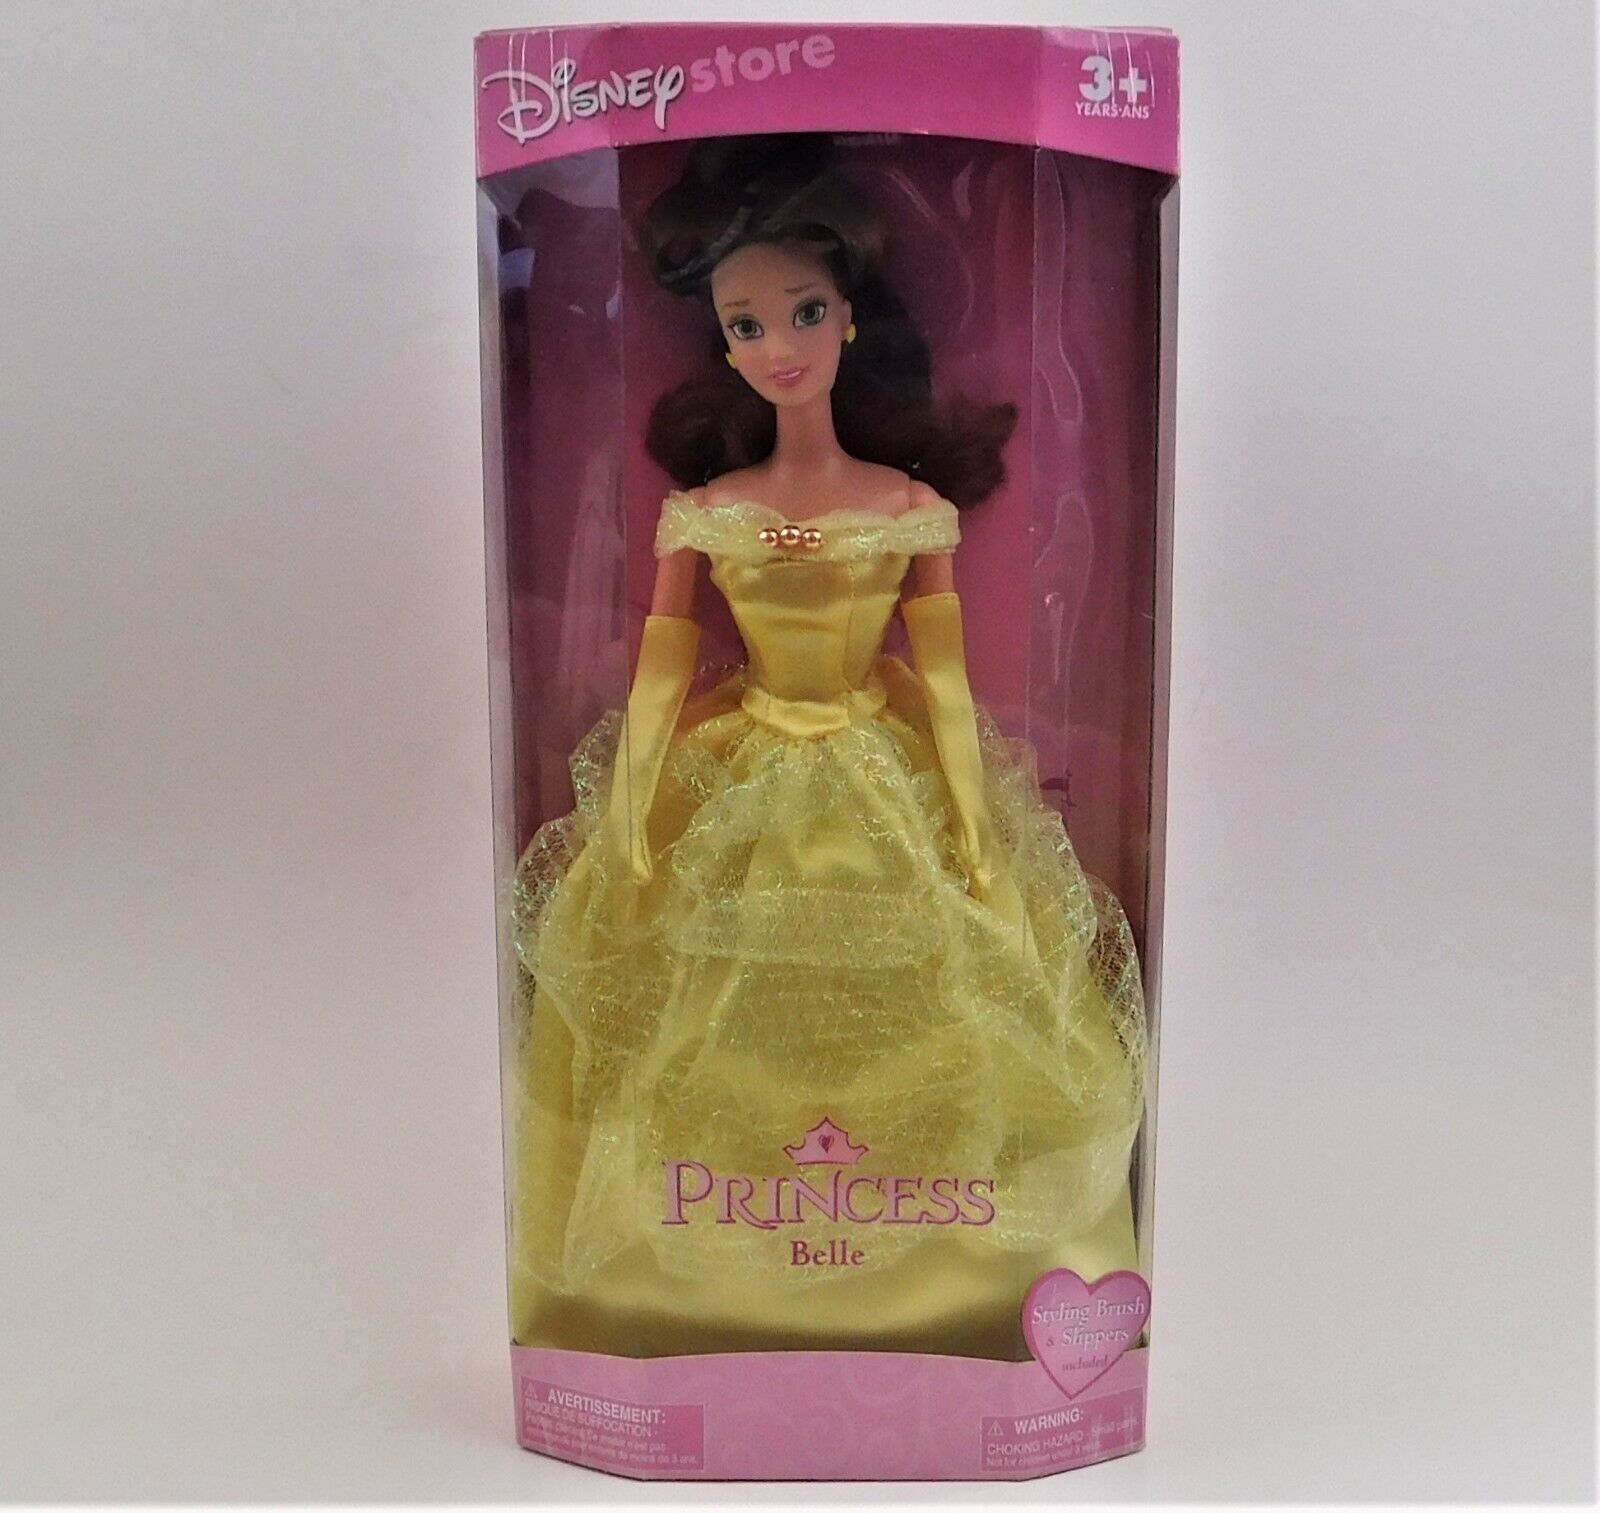 Disney Store Princess Belle Doll Beauty and Beast Yellow Dress Brush Slippers